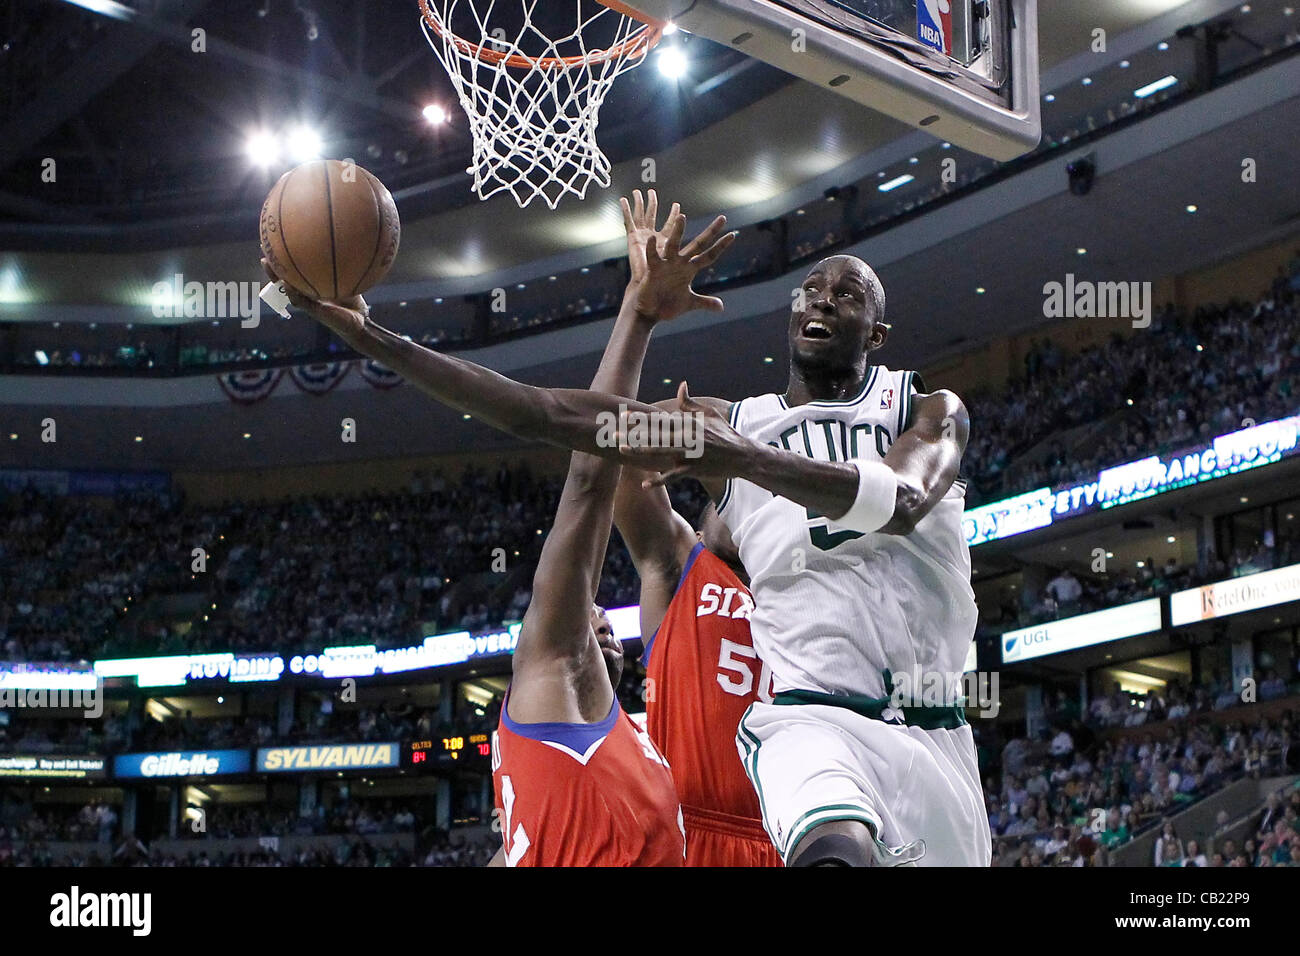 21.05.2012. Boston Massachusetts USA.  Boston Celtics power forward Kevin Garnett (5) goes for the reverse layup during the Boston Celtics 101-85 victory over the Philadelphia Sixer, in Game 5 of the Eastern Conference semifinals playoff series, at the TD Banknorth Garden, Boston, Massachusetts, USA Stock Photo